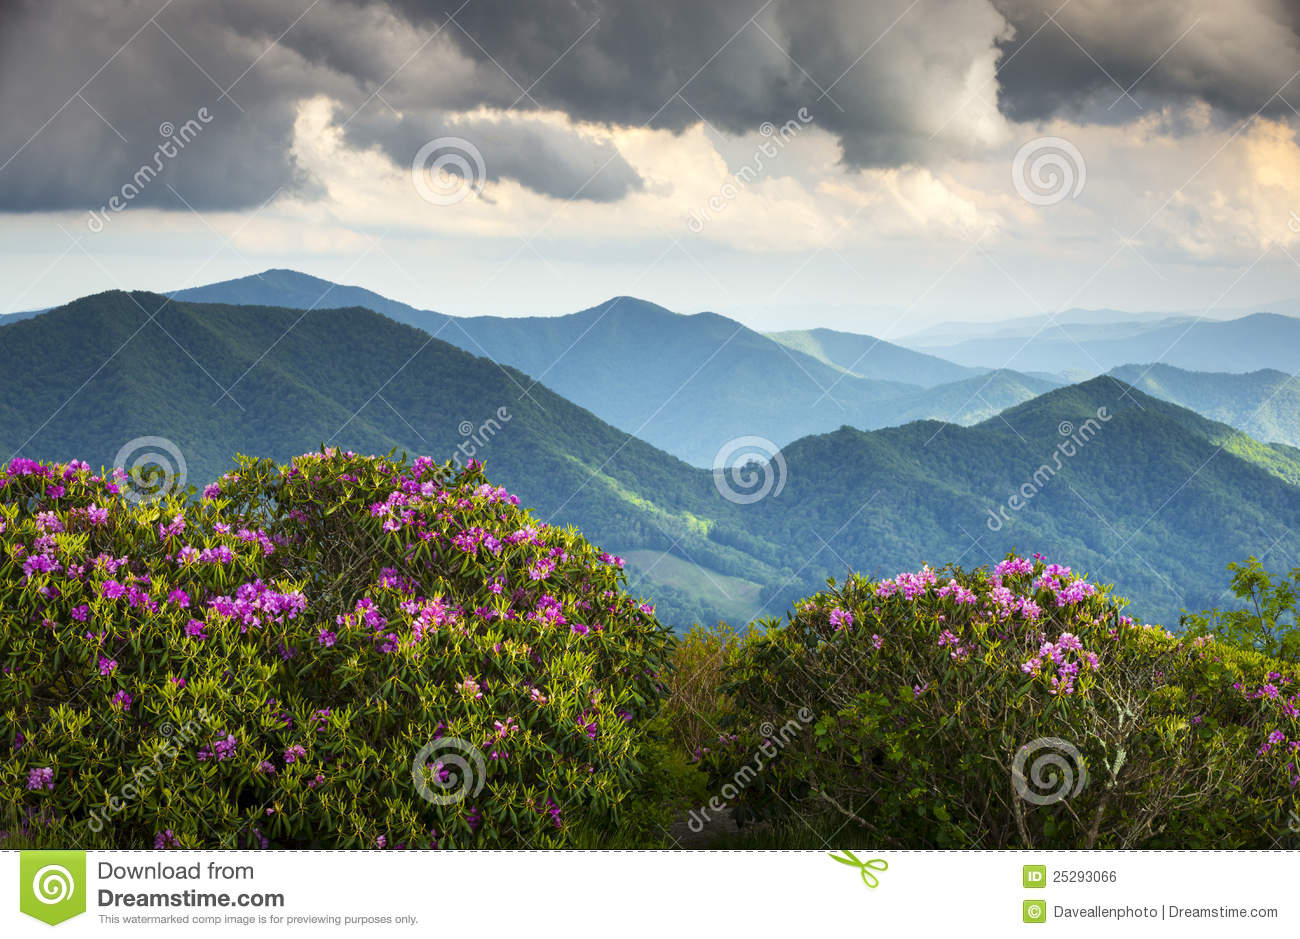 Blue Ridge Appalachian Mountain Peaks And Spring Rhododendron Flowers